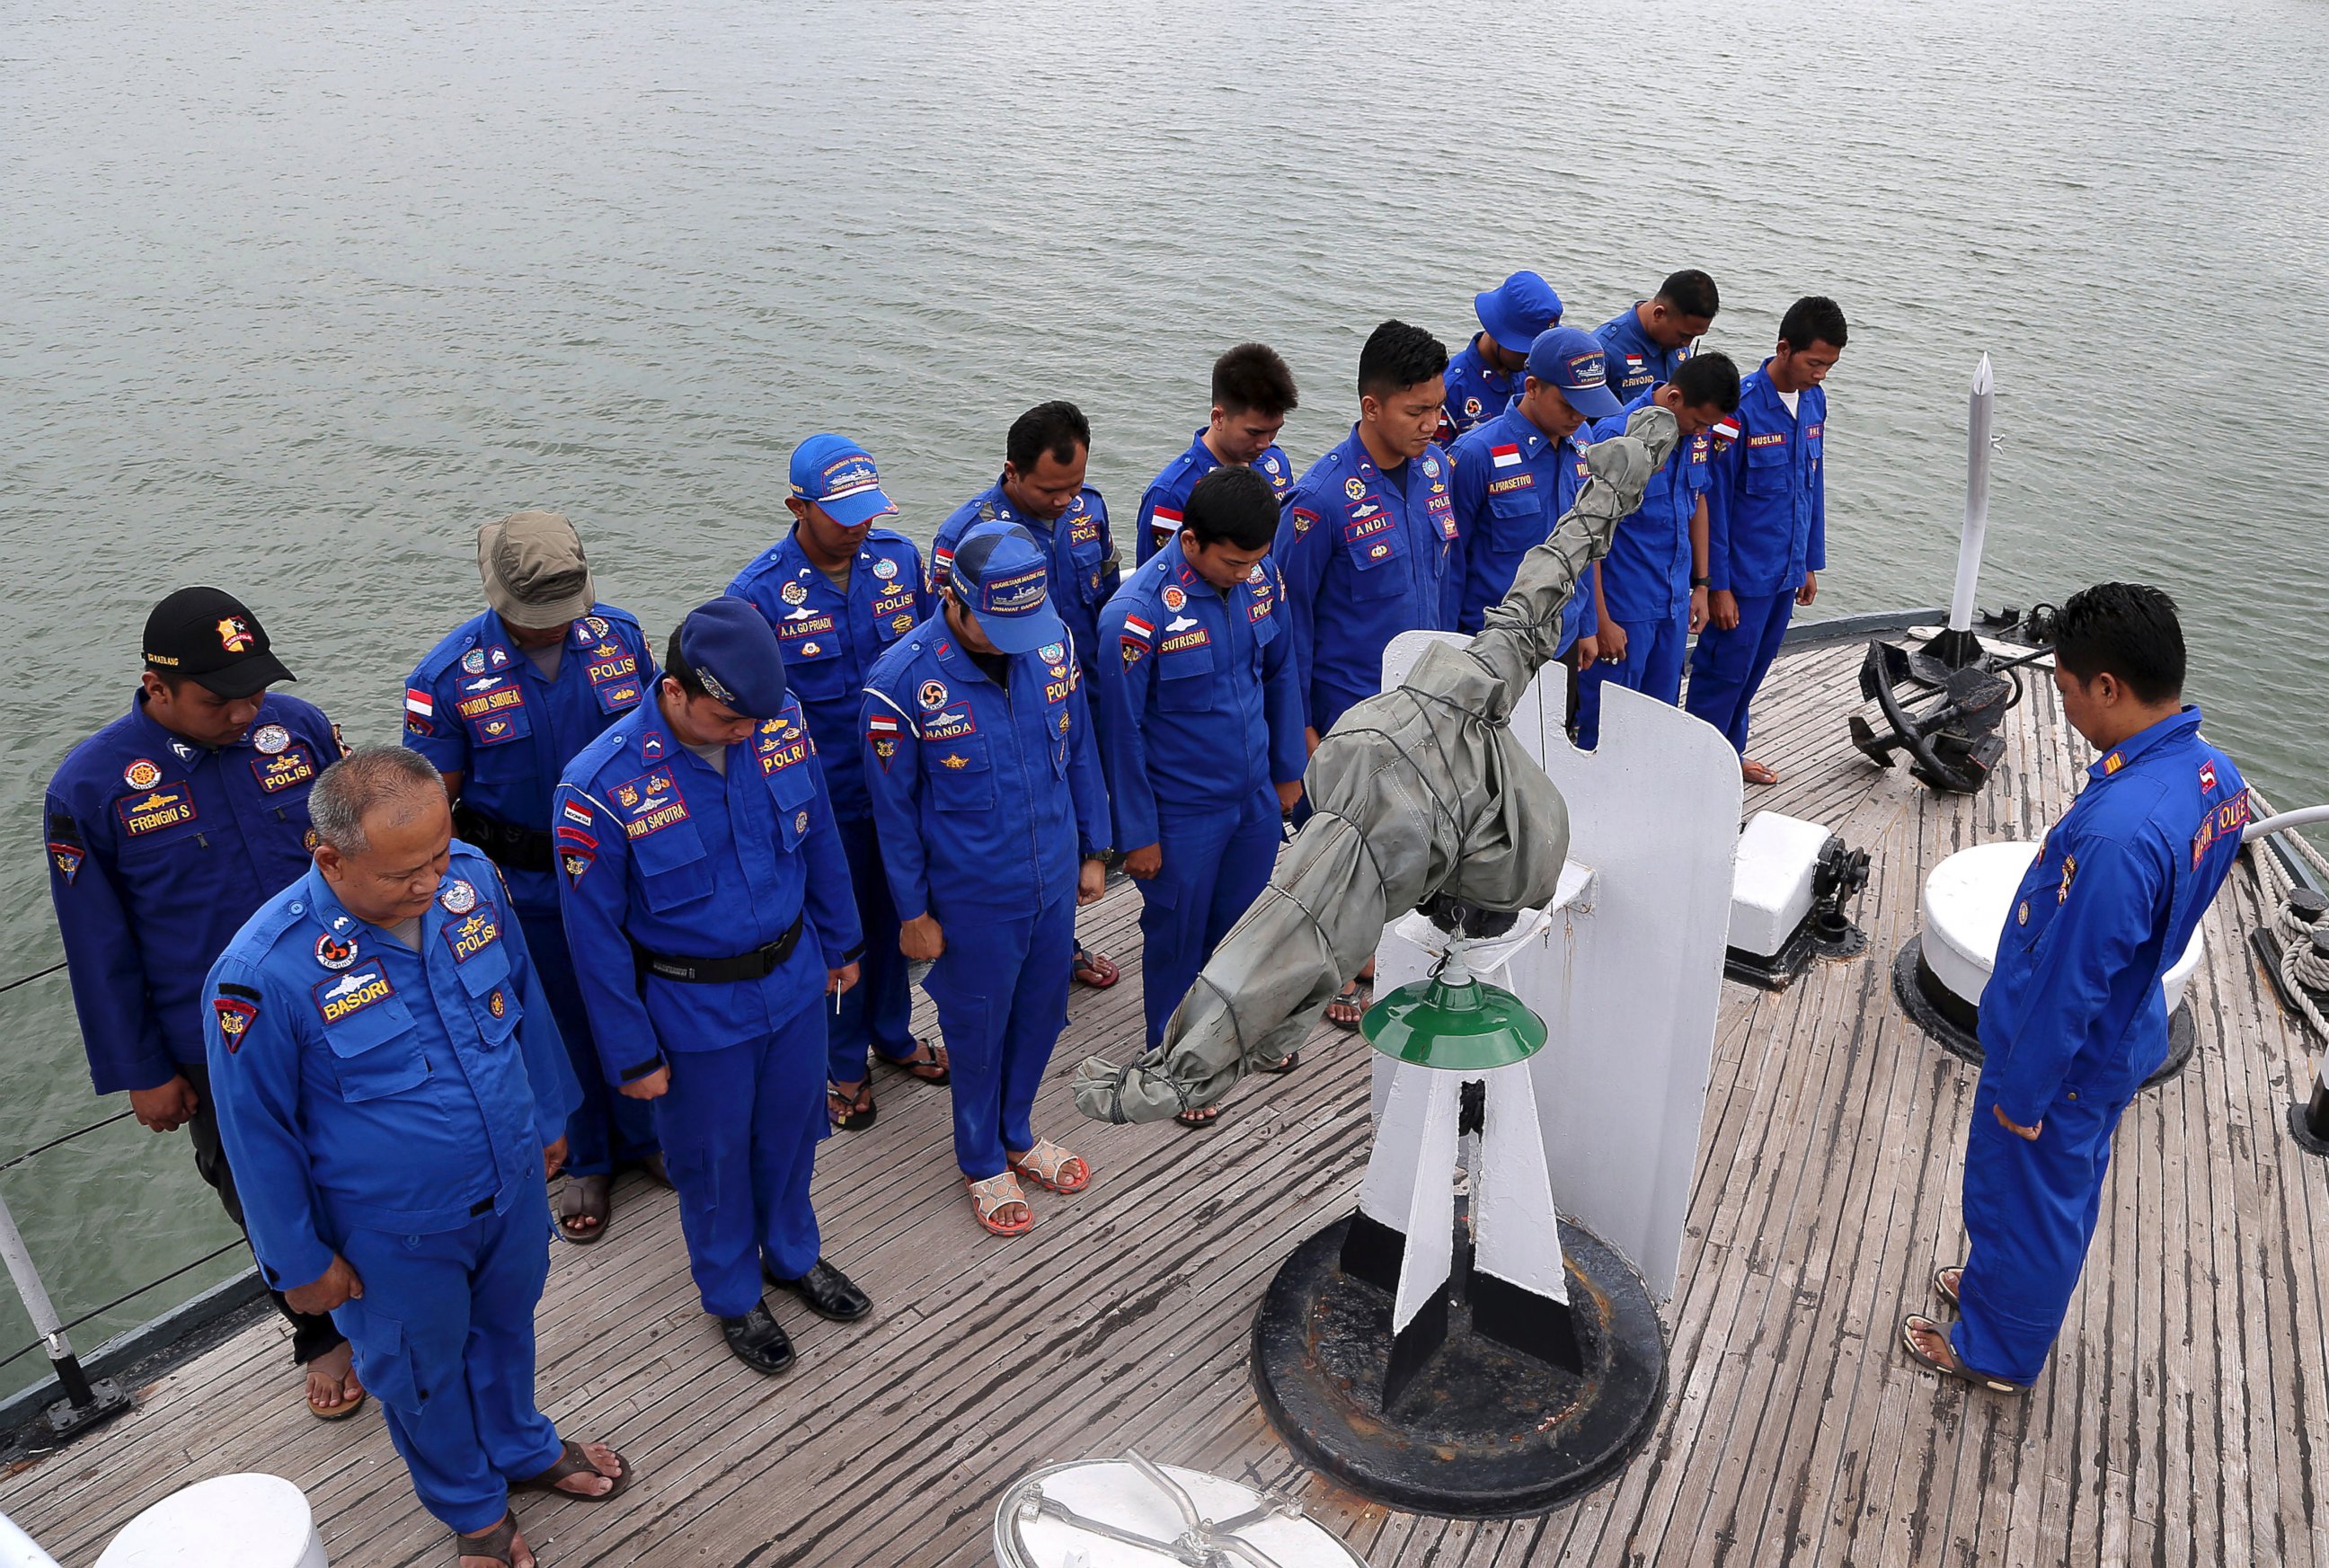 PHOTO: Members of Indonesia's Marine Police pray on board a search and rescue ship before a search operation for the missing AirAsia flight 8501, at Pangkal Pinang port in Sumatra Island, Dec. 29, 2014 in Indonesia.